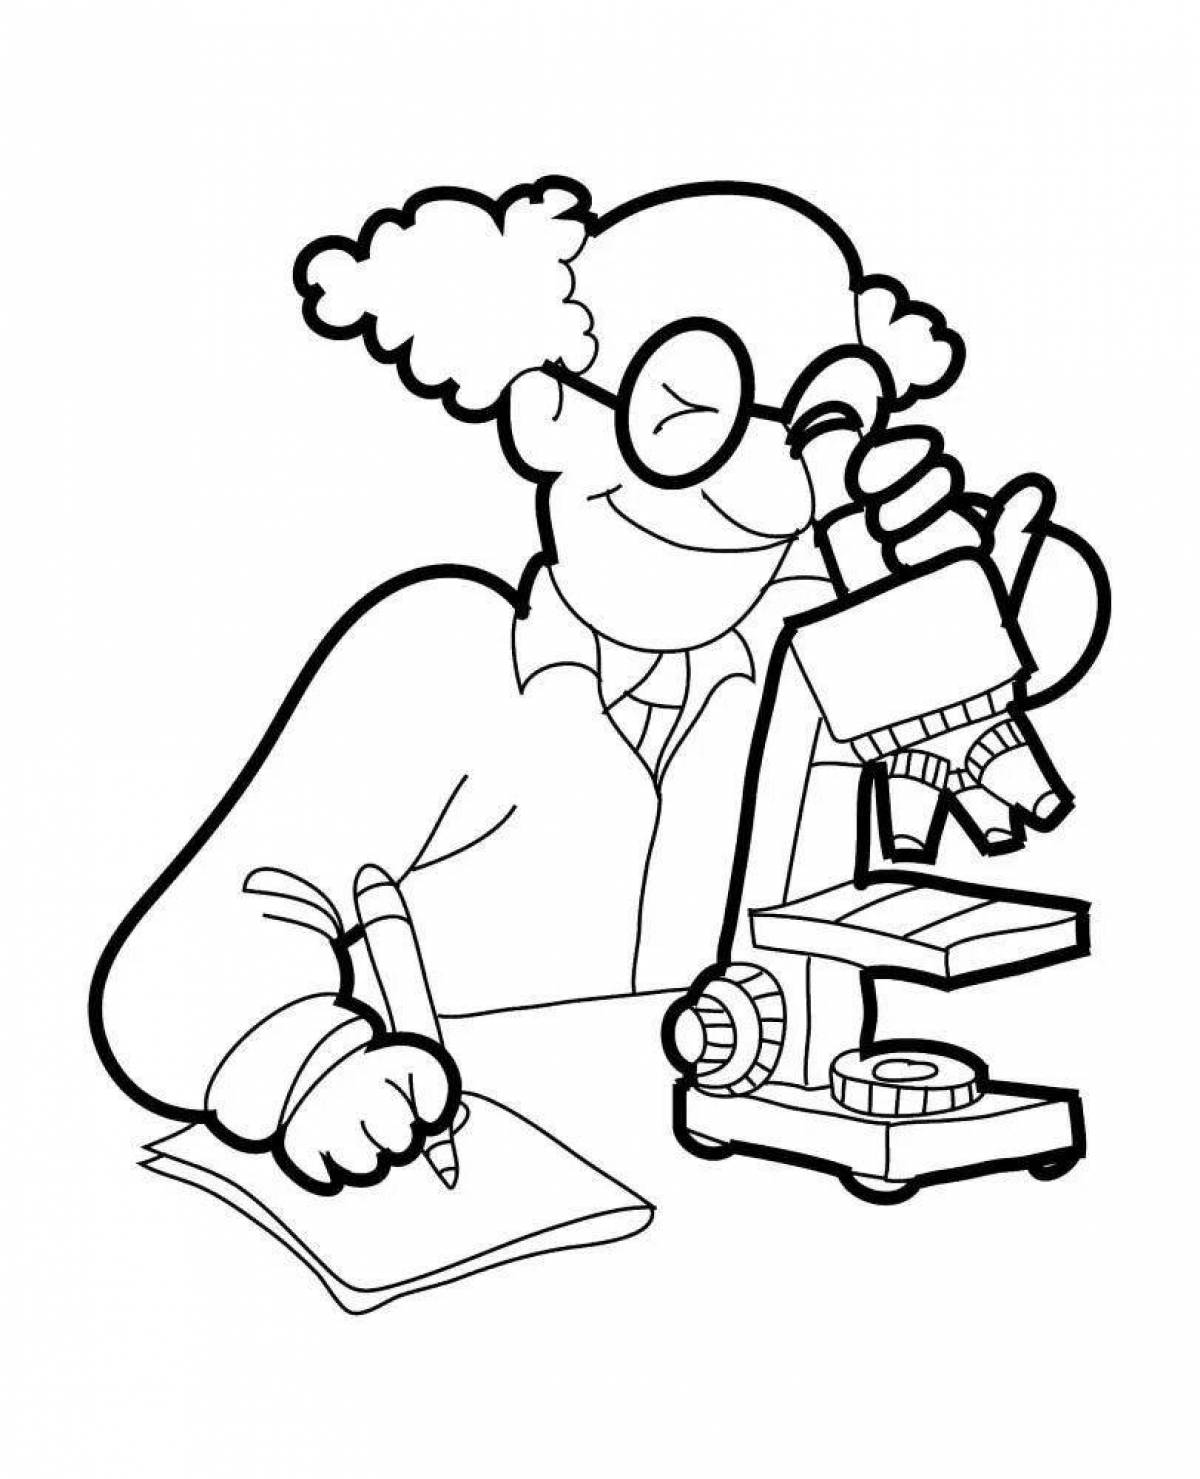 Science world coloring pages